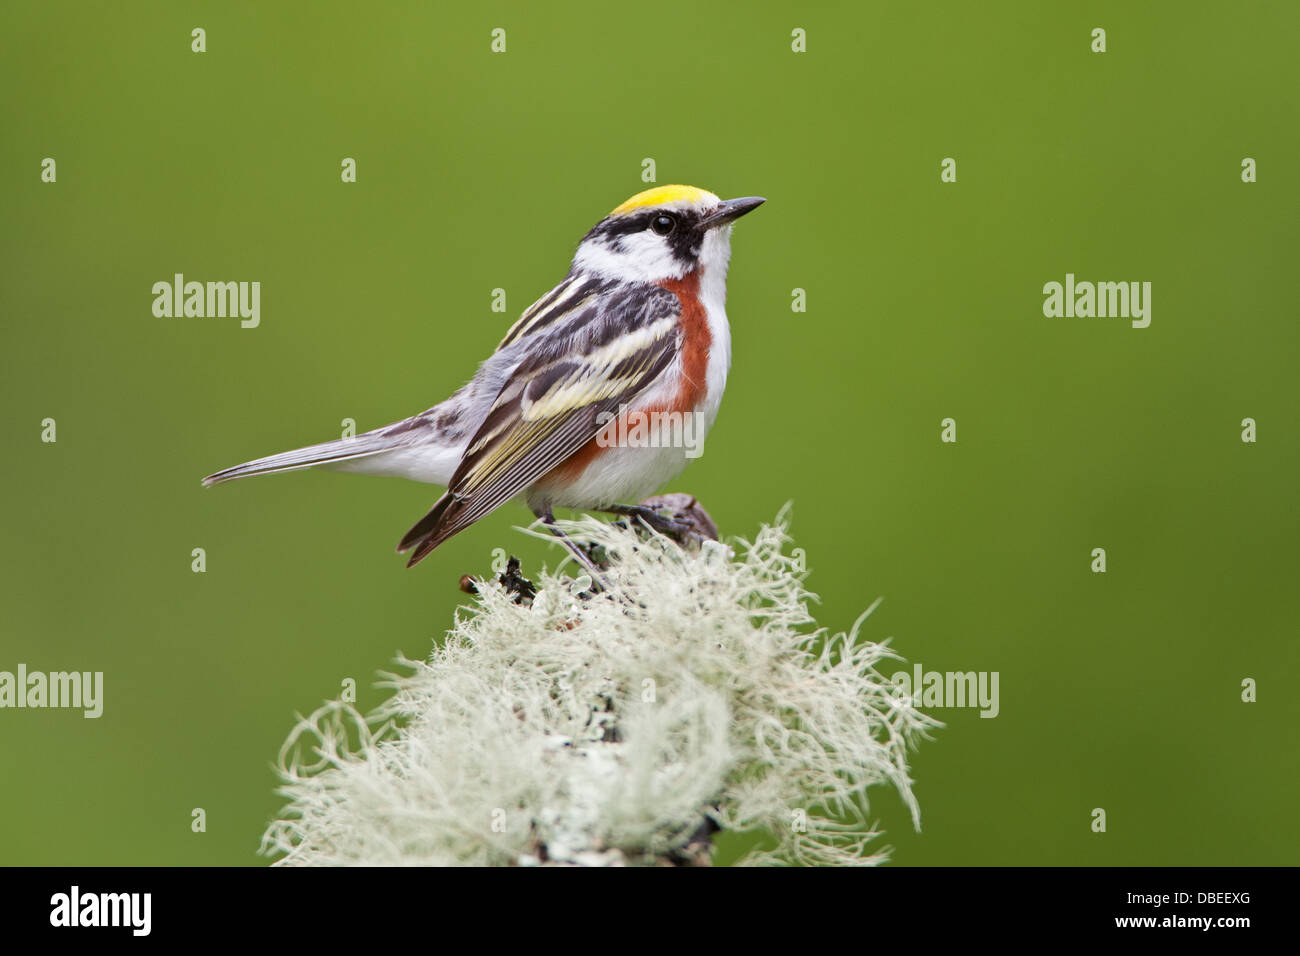 Chestnut-sided Warbler perched on branch with fruticose lichen bird songbird Ornithology Science Nature Wildlife Environment Stock Photo